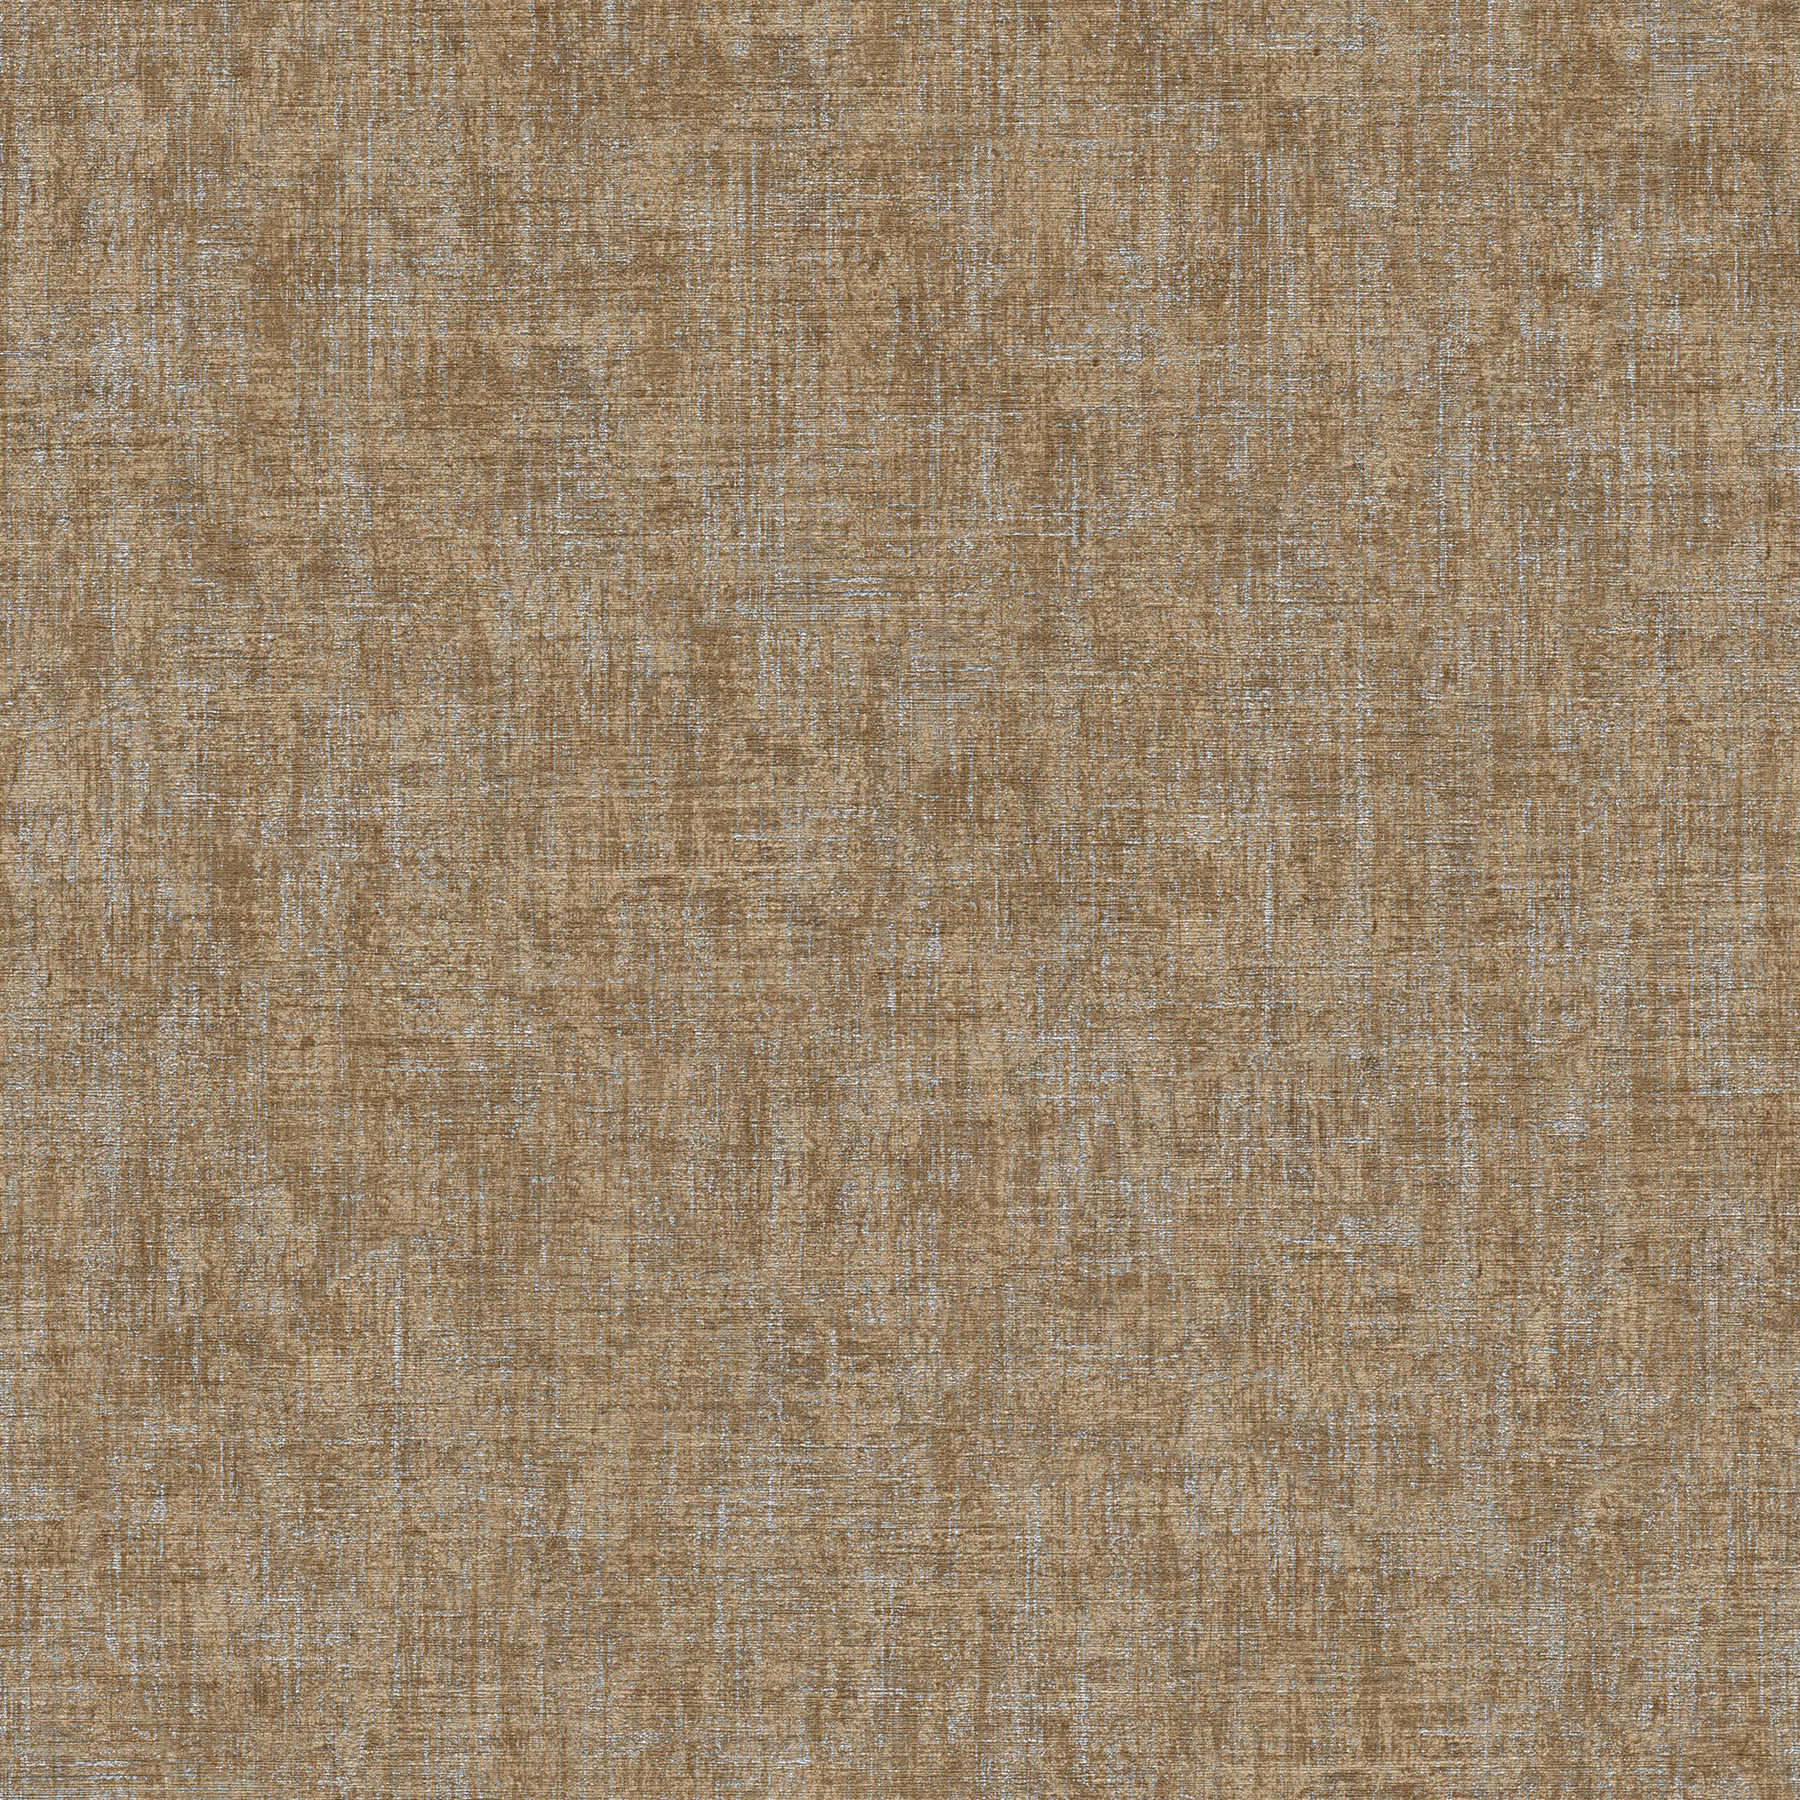         wallpaper brown mottled with silver accents & wood texture
    